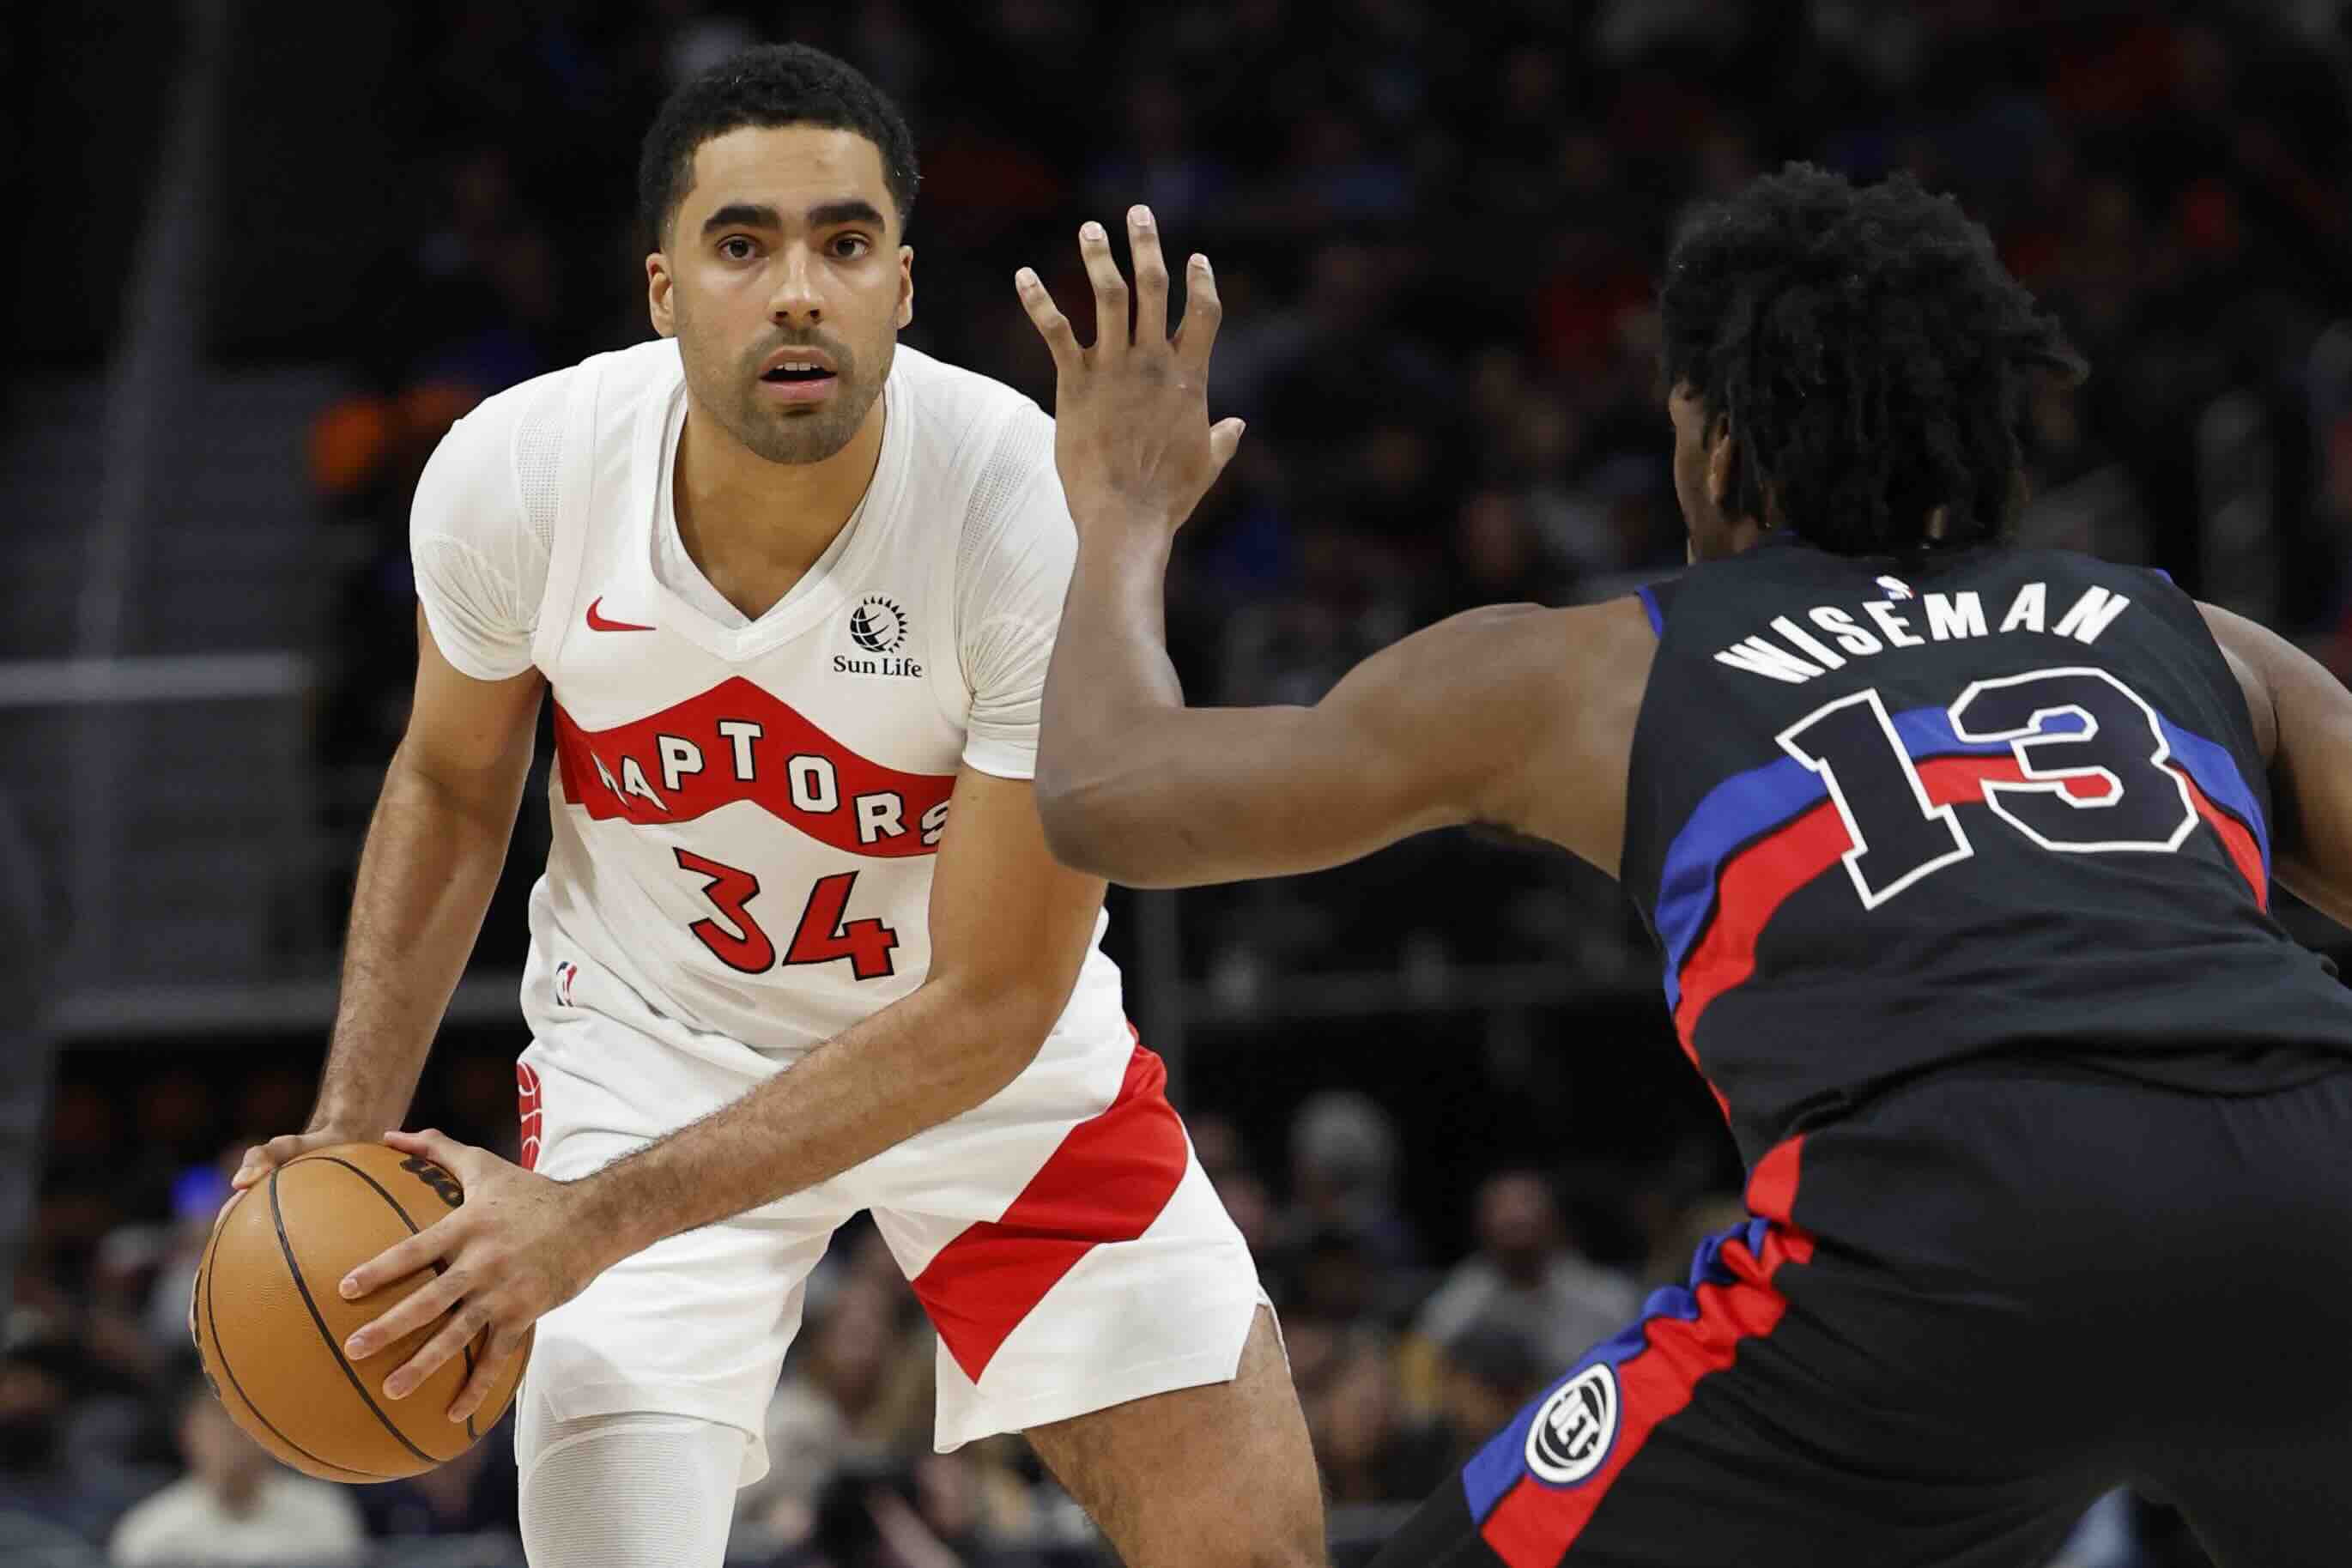 NBA: Two more charged in gambling scheme that ended Jontay Porter's career